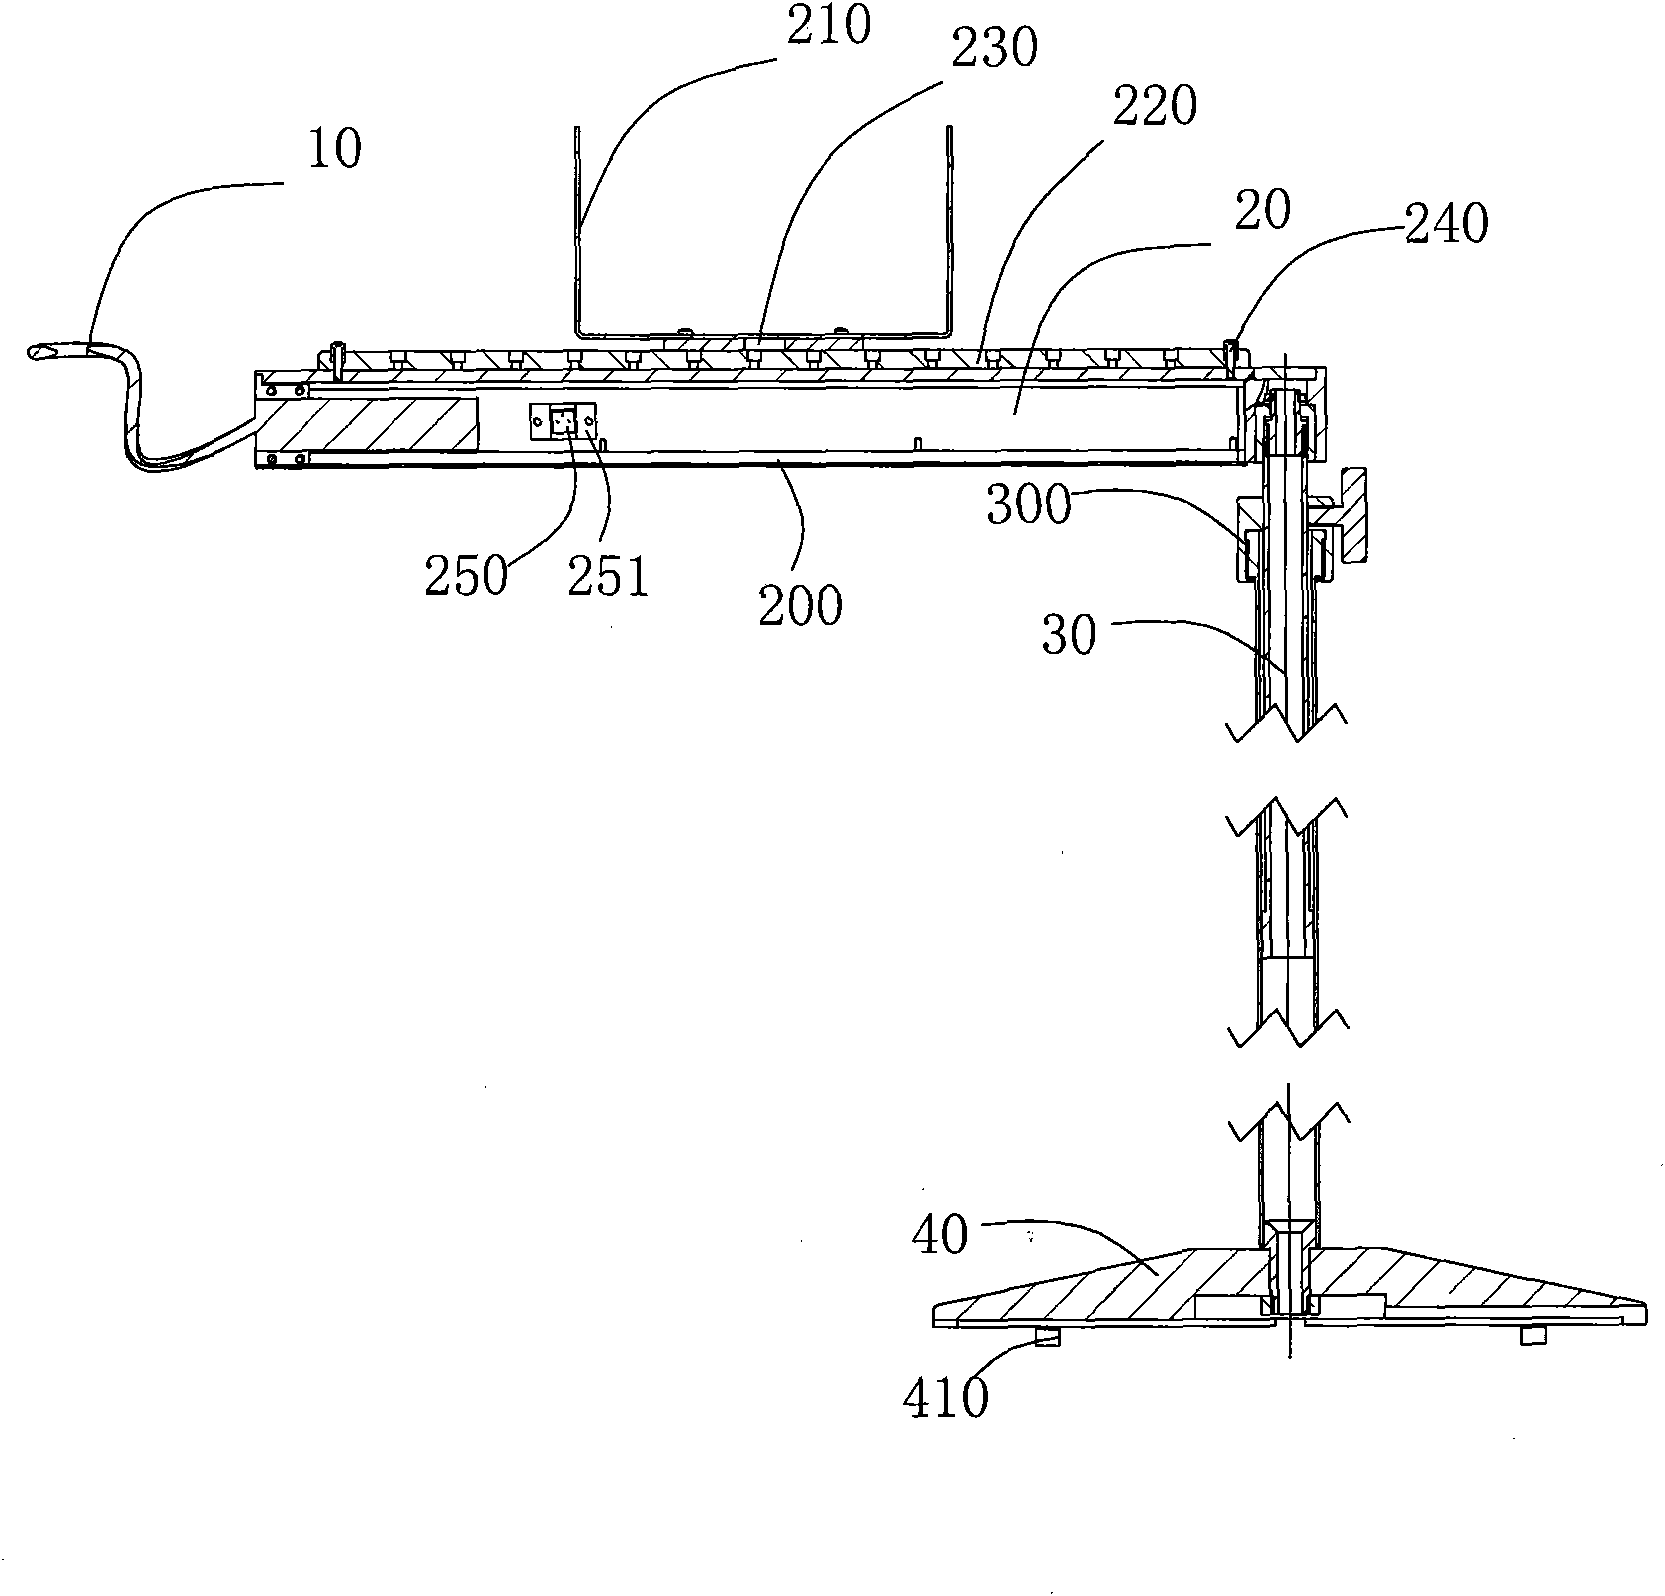 Electronic inspection device for ears, nose and throat